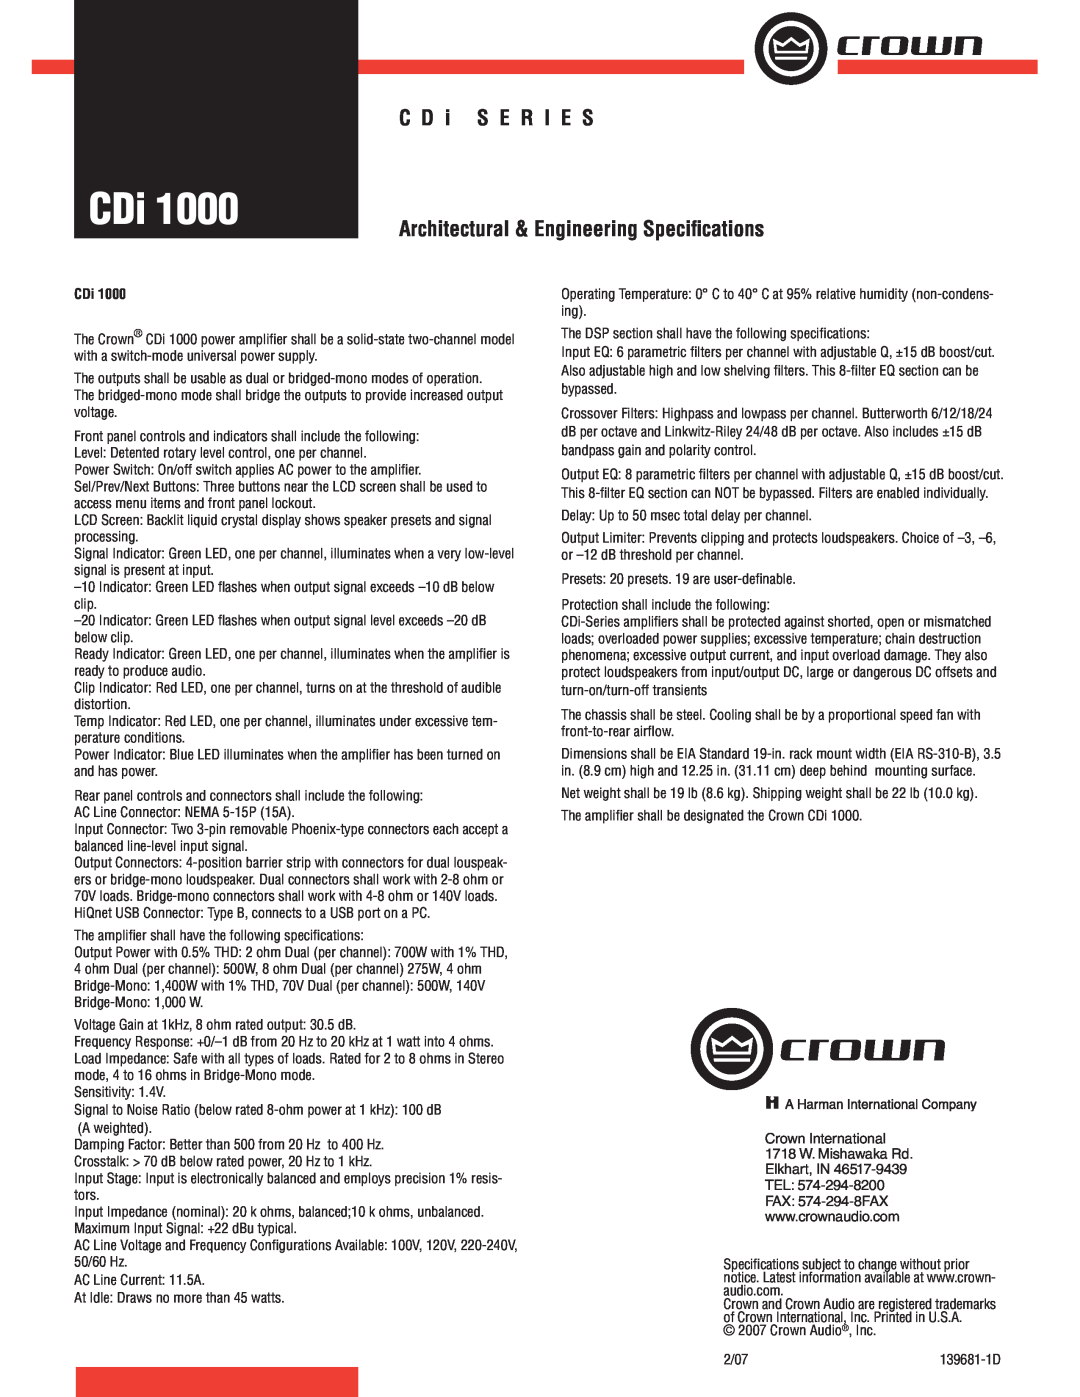 Crown Audio CDi 1000 specifications C D i S E R I E S, Architectural & Engineering Speciﬁcations 